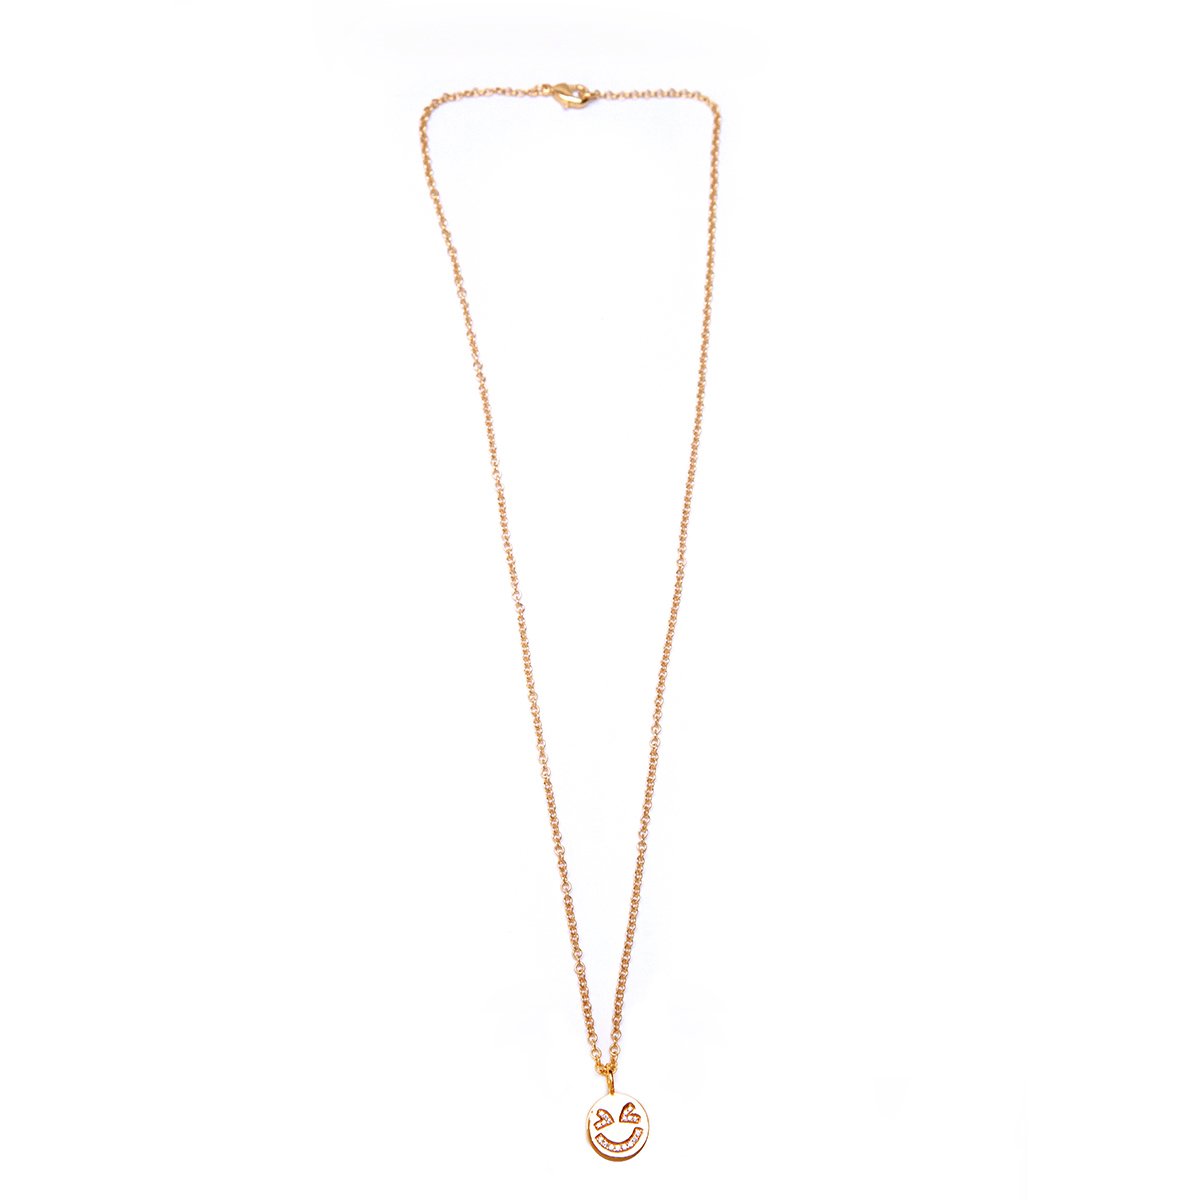 Laughing Face Necklace (Rose Gold) - Chainless Brain